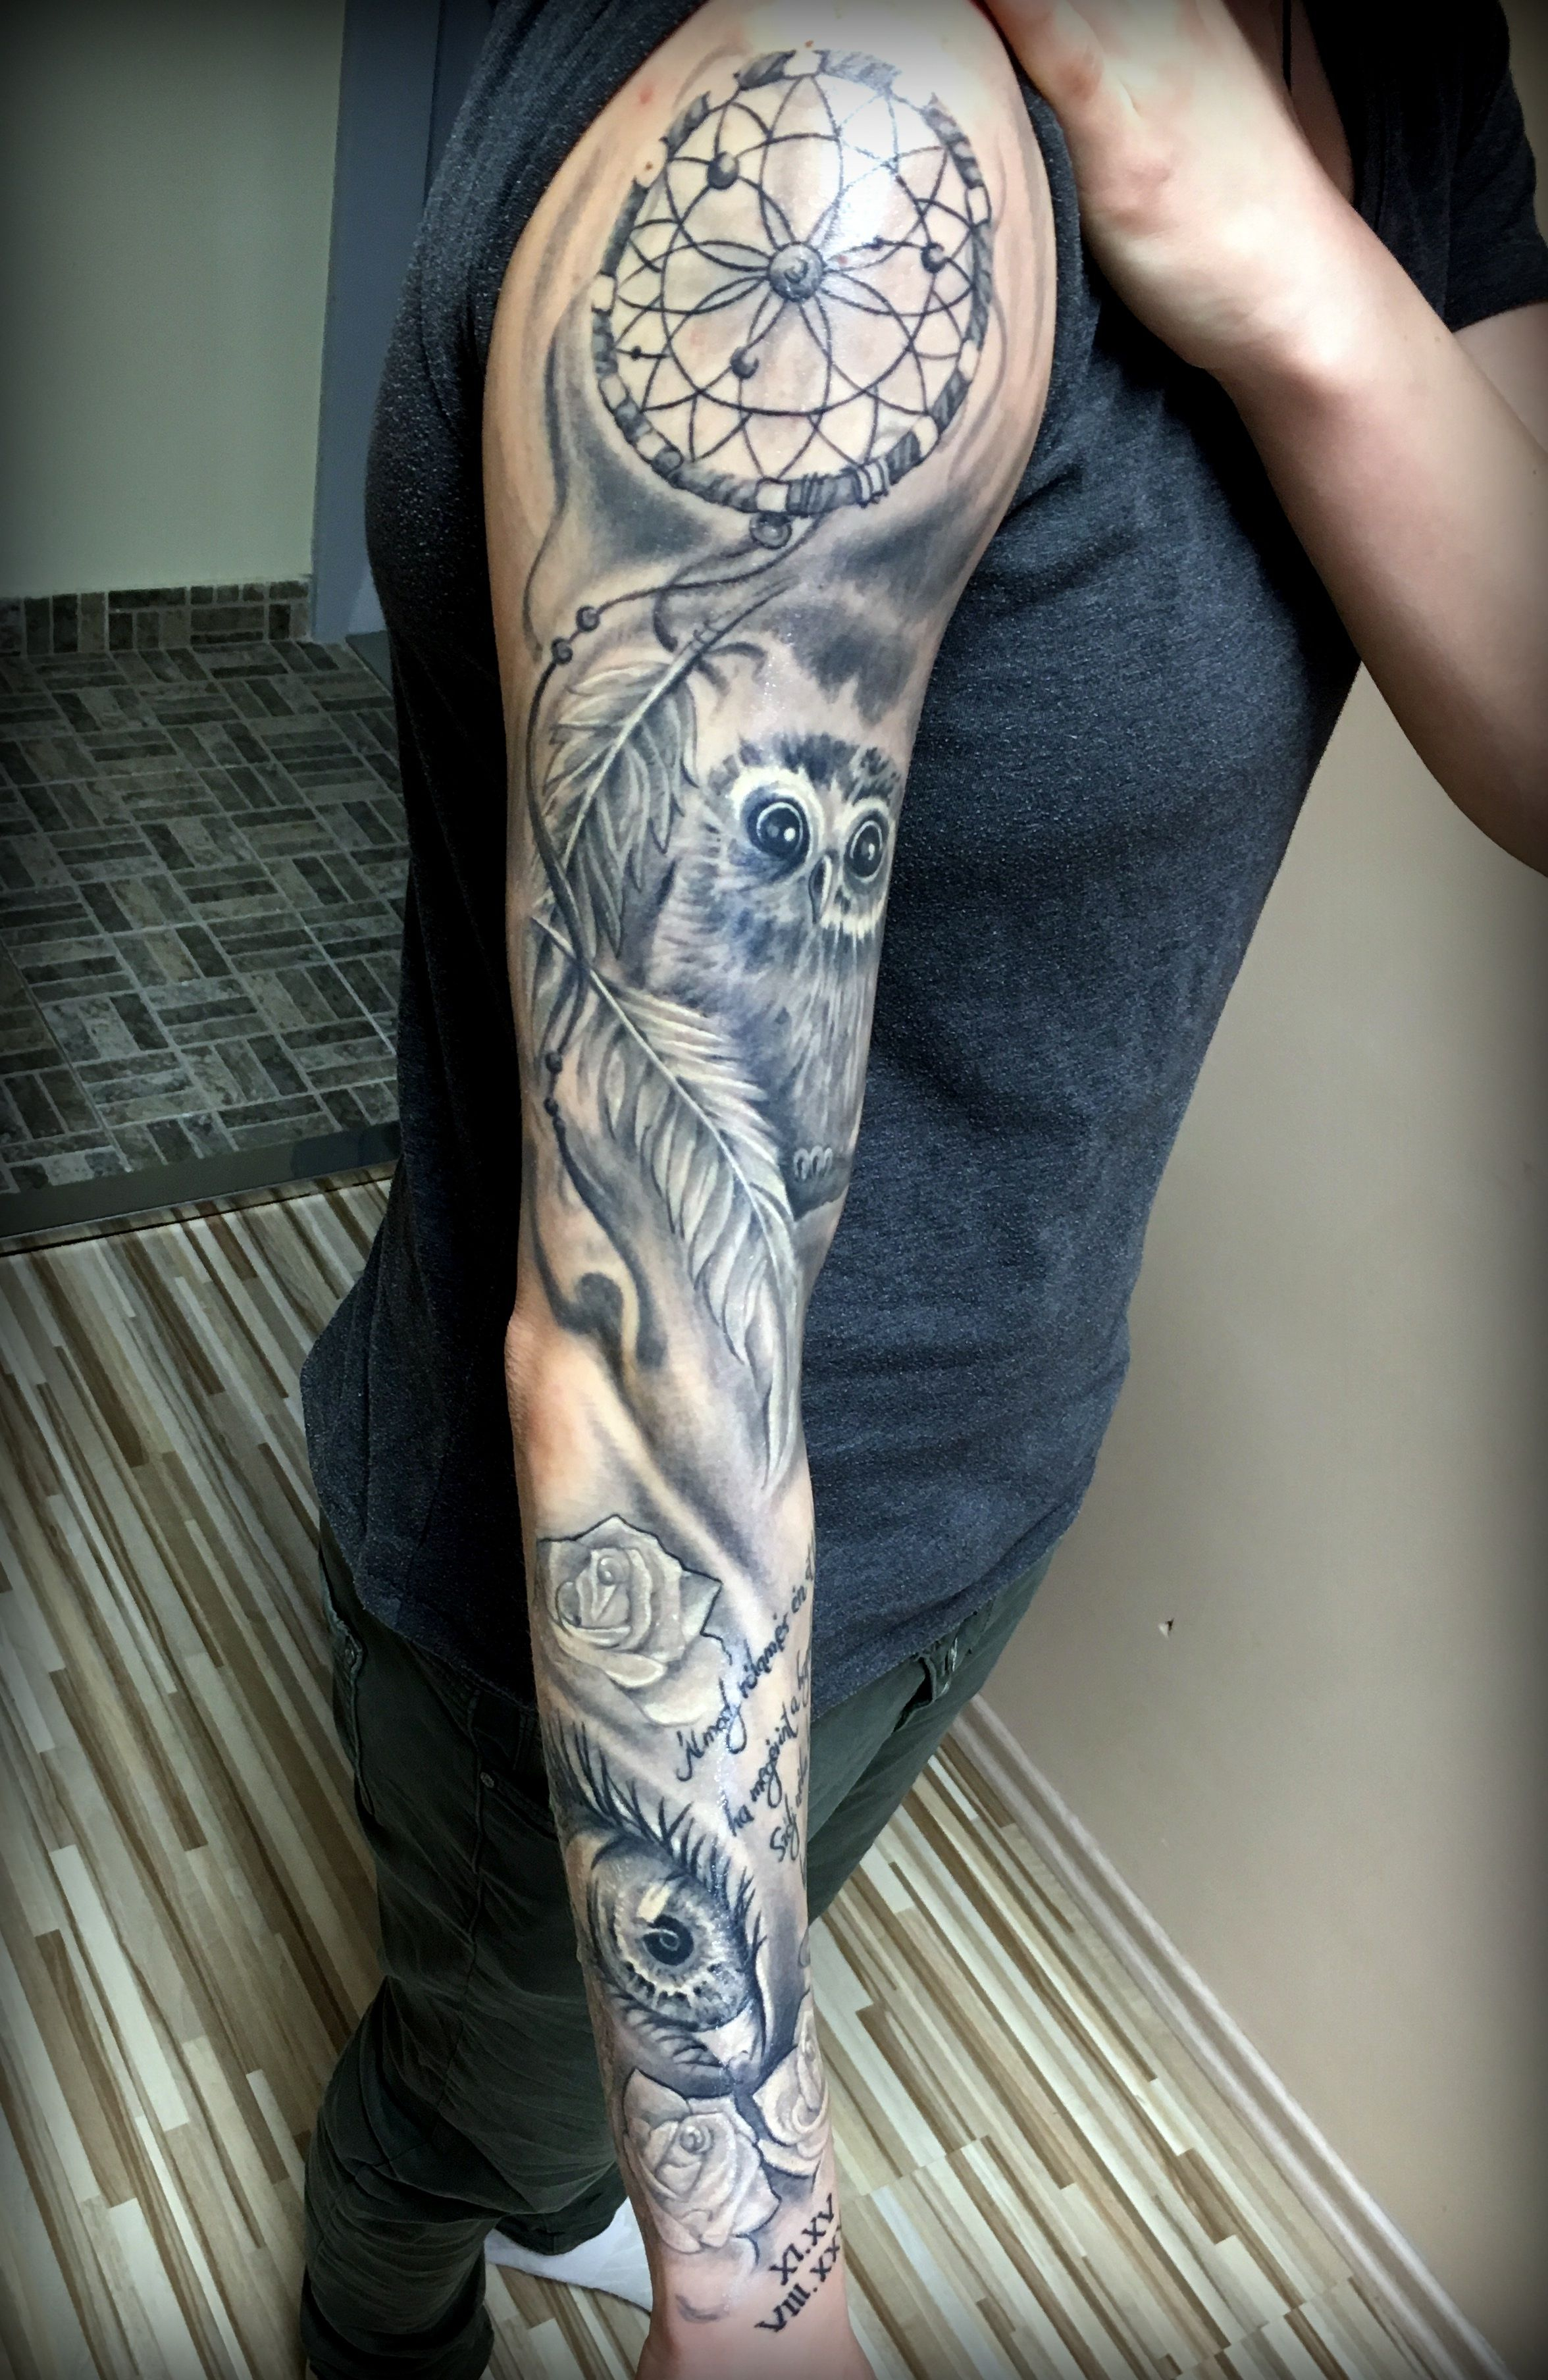 Full Woman Arm Tattooeyeowl And Dreamcather Laczko Balazs with proportions 2352 X 3616